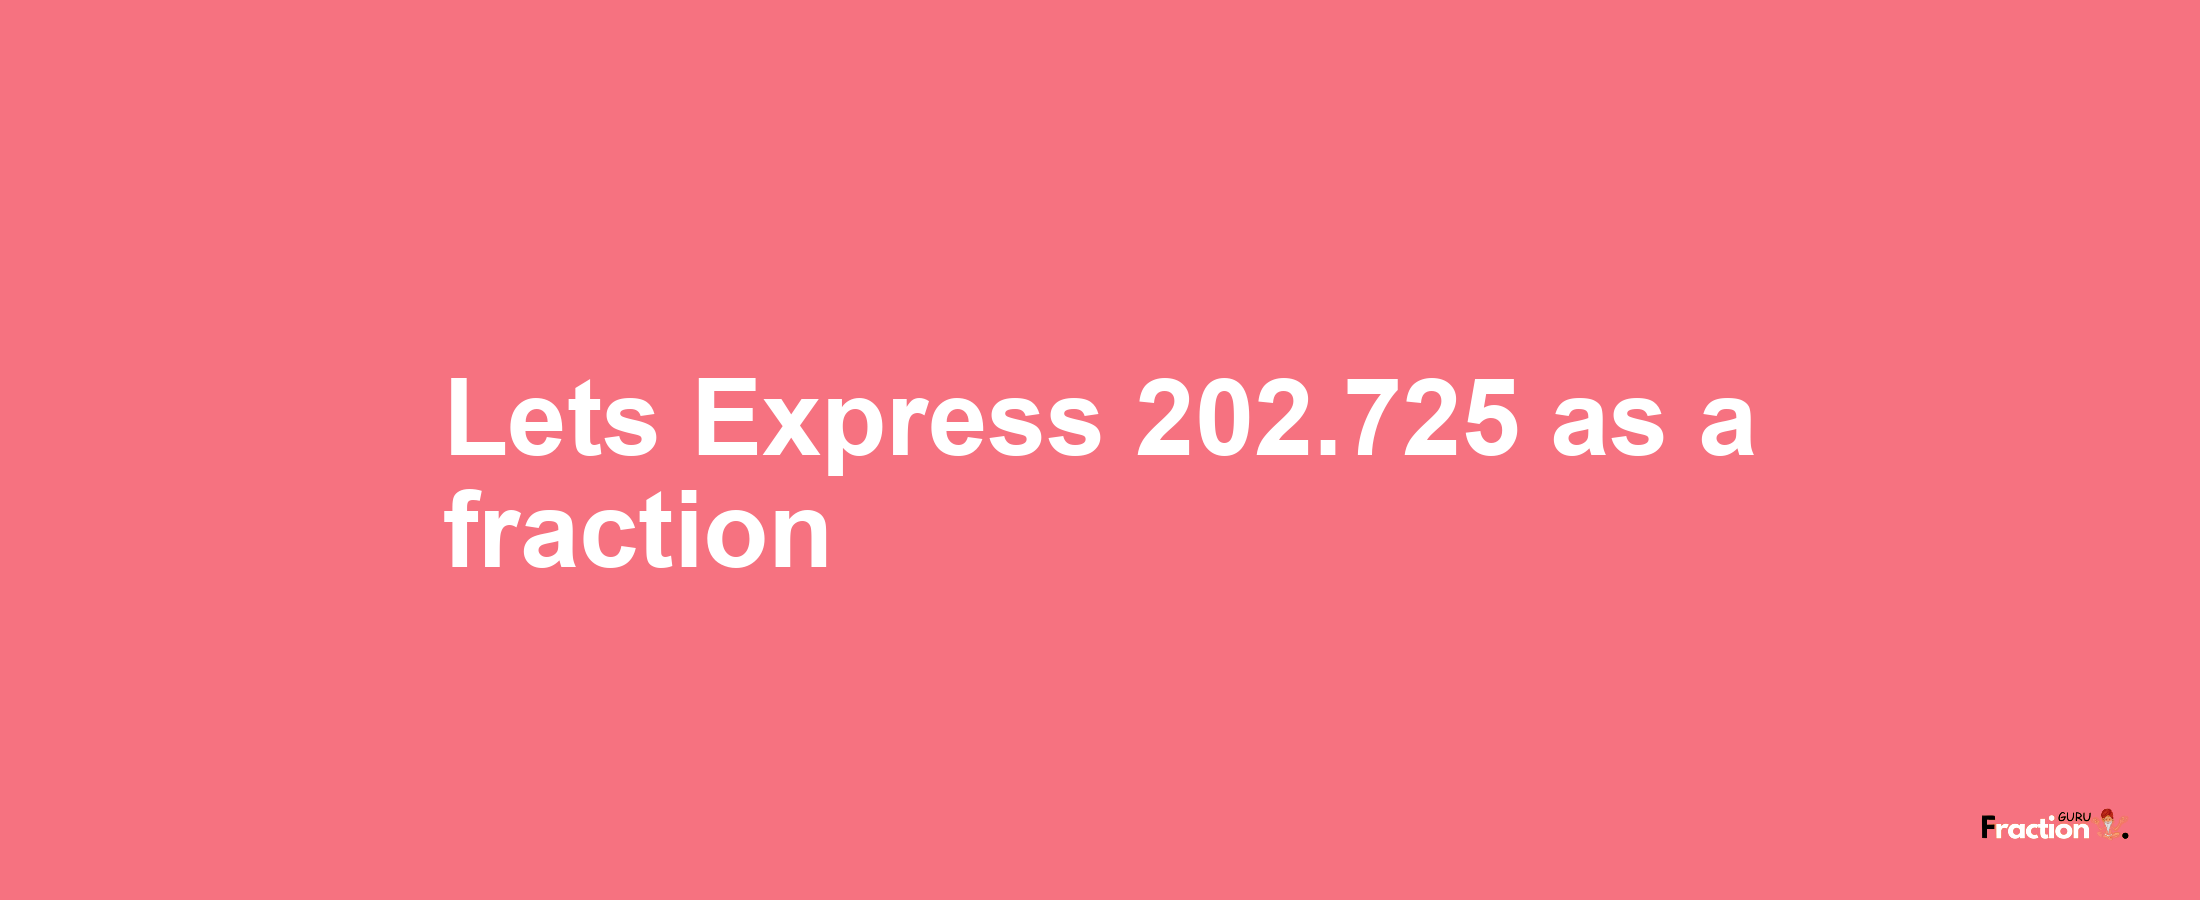 Lets Express 202.725 as afraction